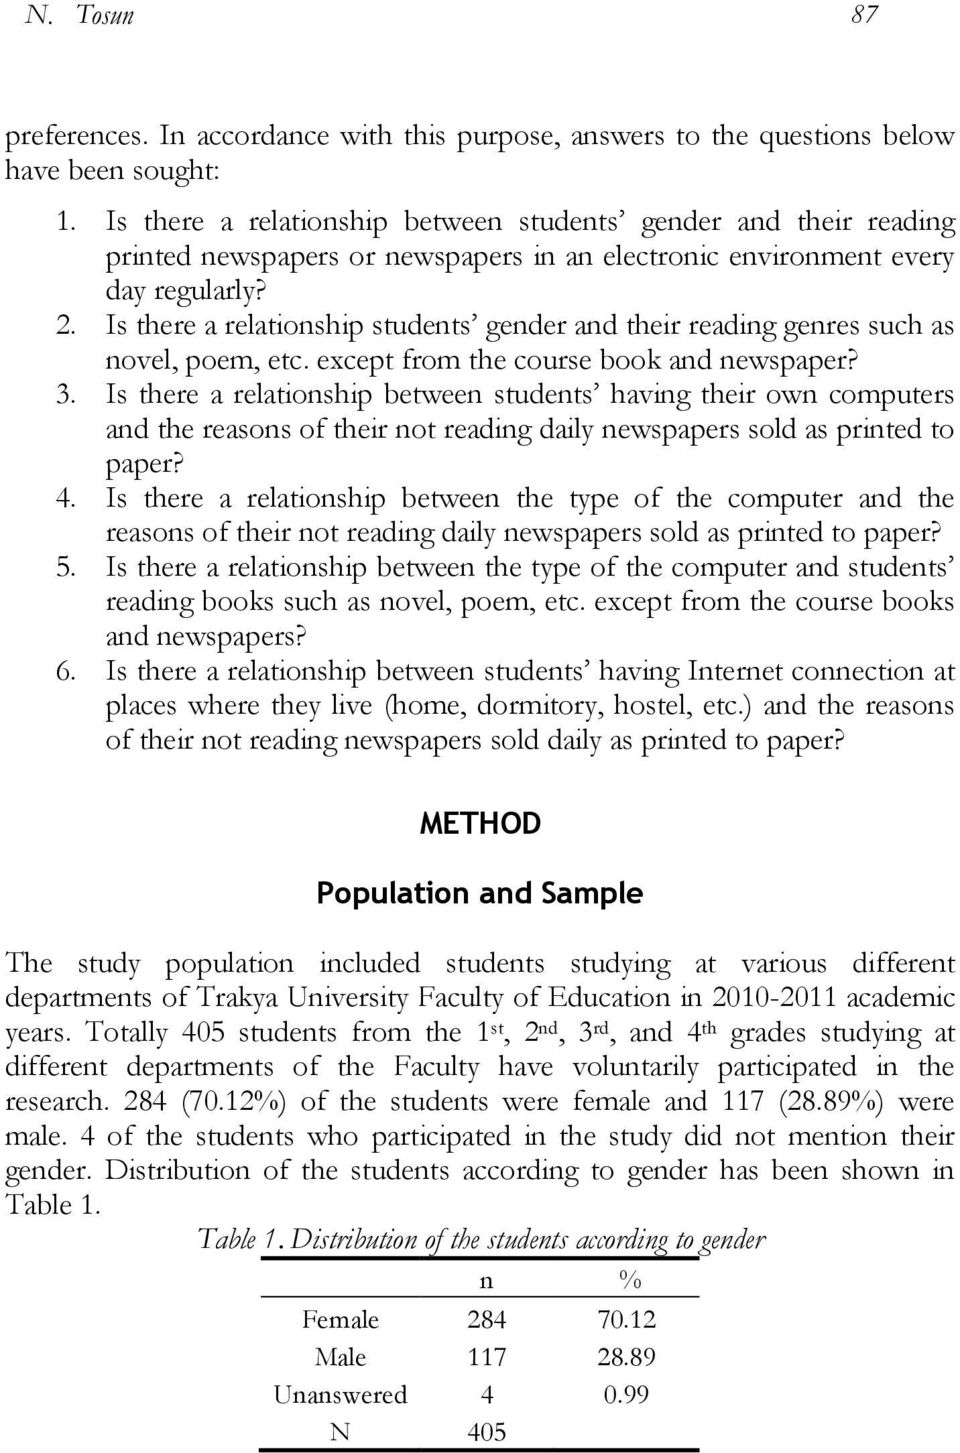 Is there a relationship students gender and their reading genres such as novel, poem, etc. except from the course book and newspaper? 3.